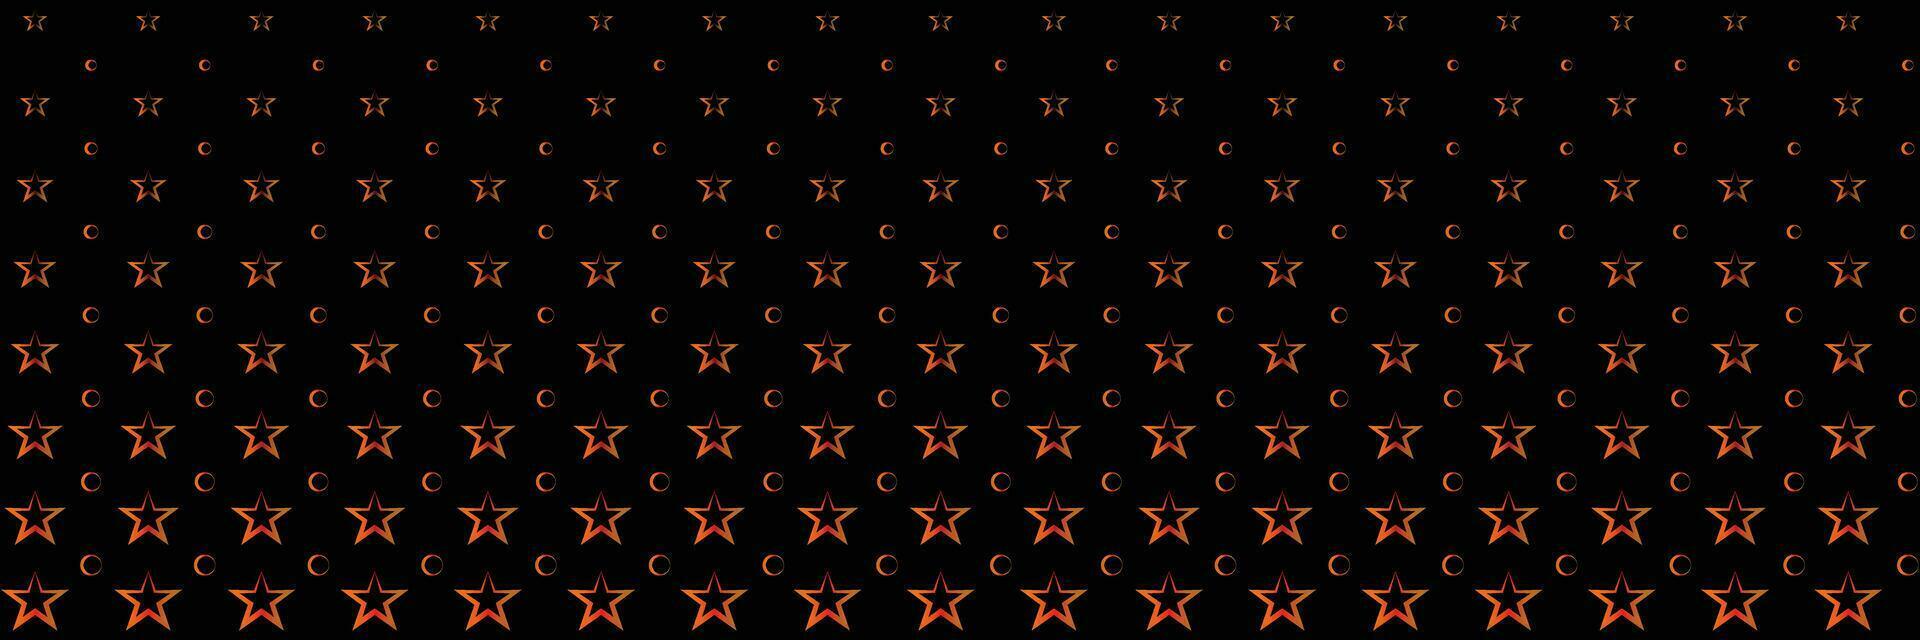 Night sky with stars background. vector